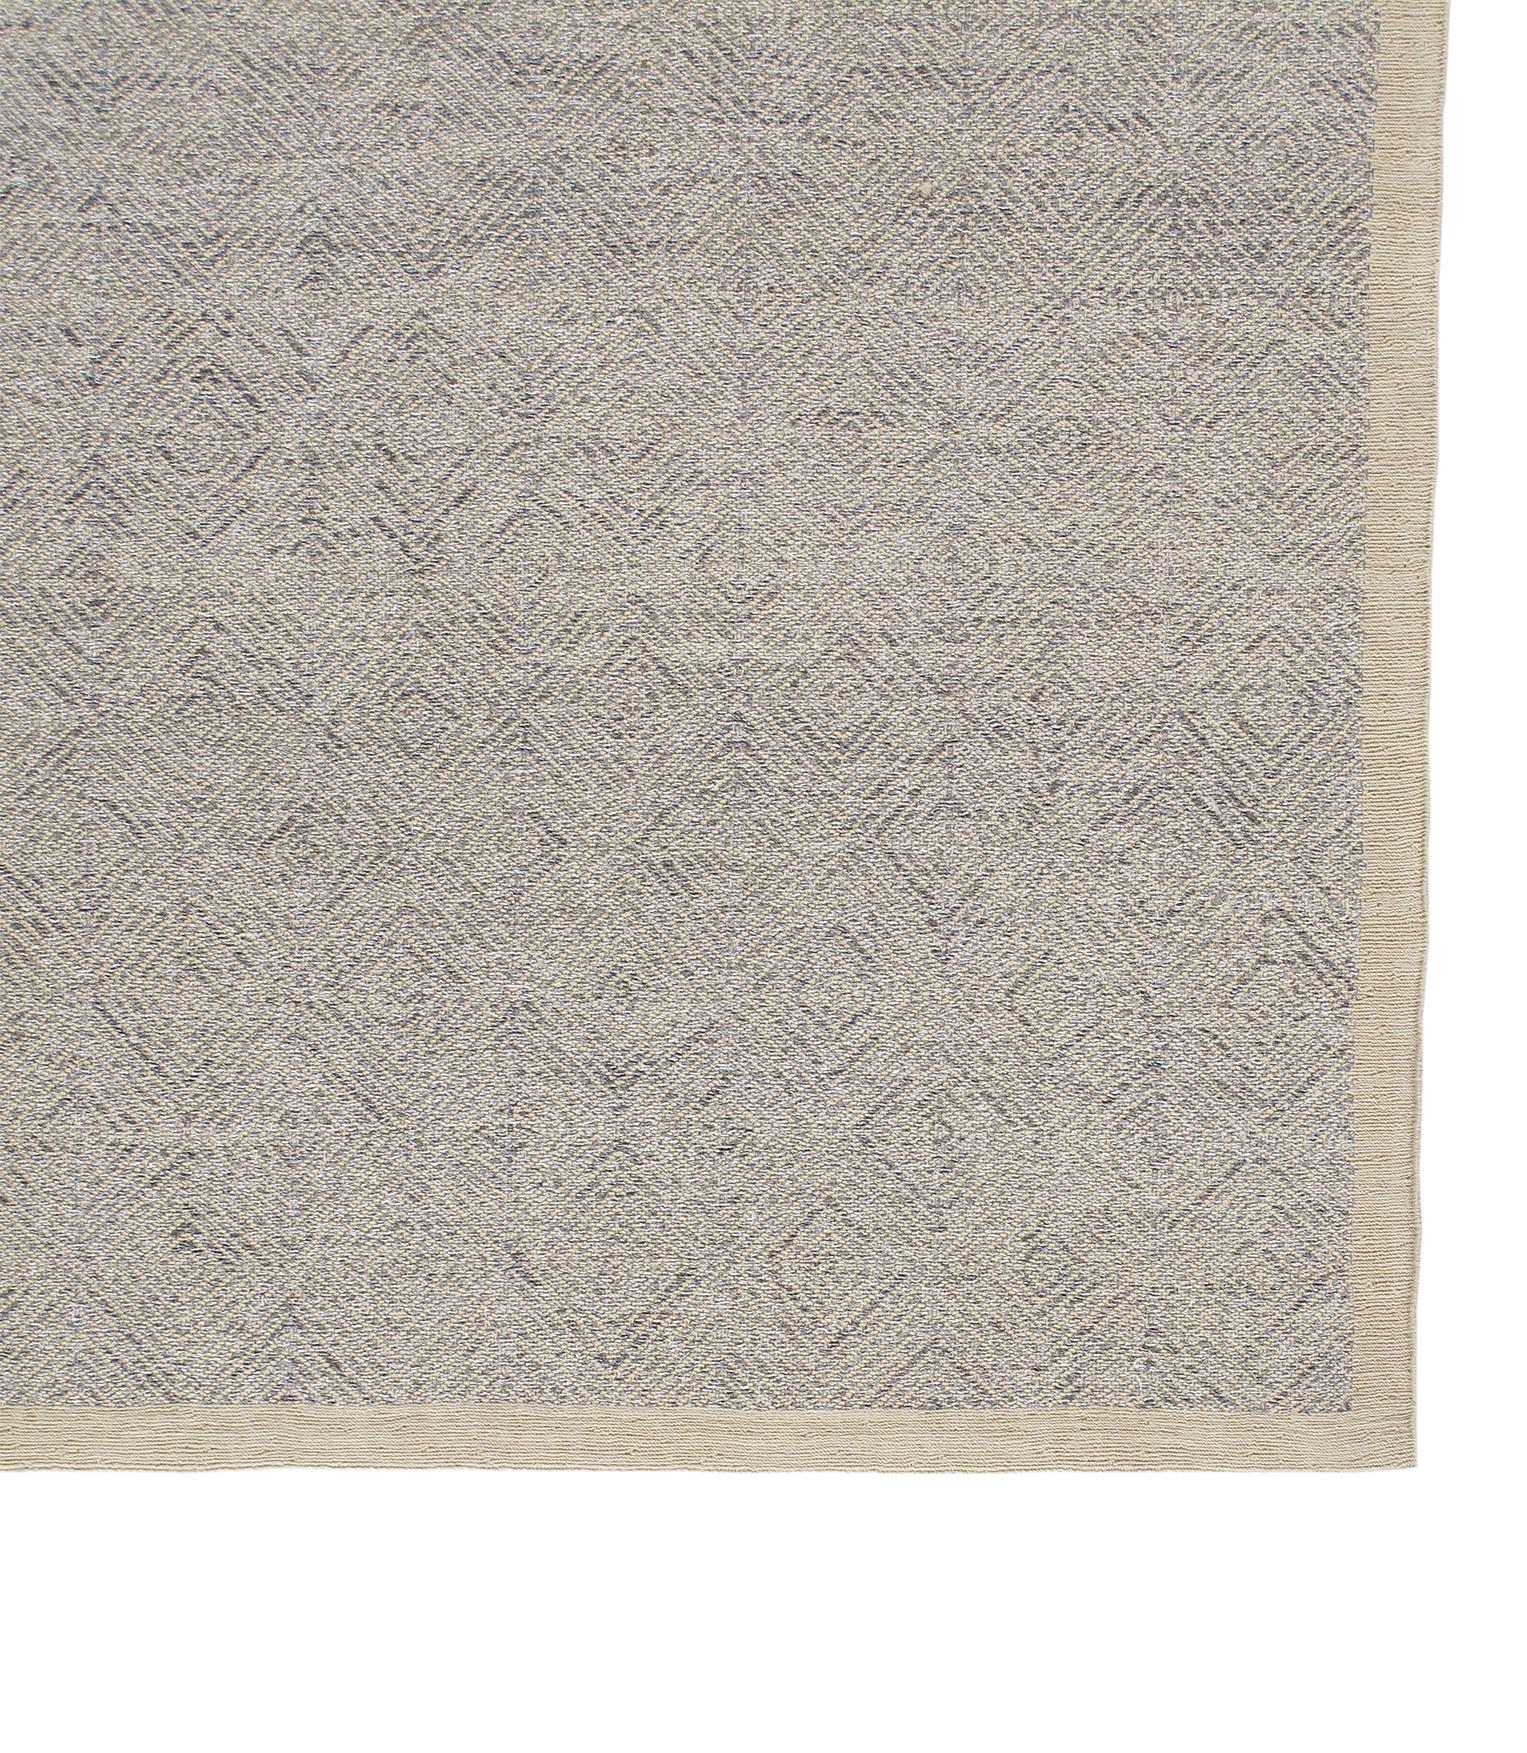 Contemporary Modern Sumak Flatweave Rug in Beige and Grey Tones For Sale